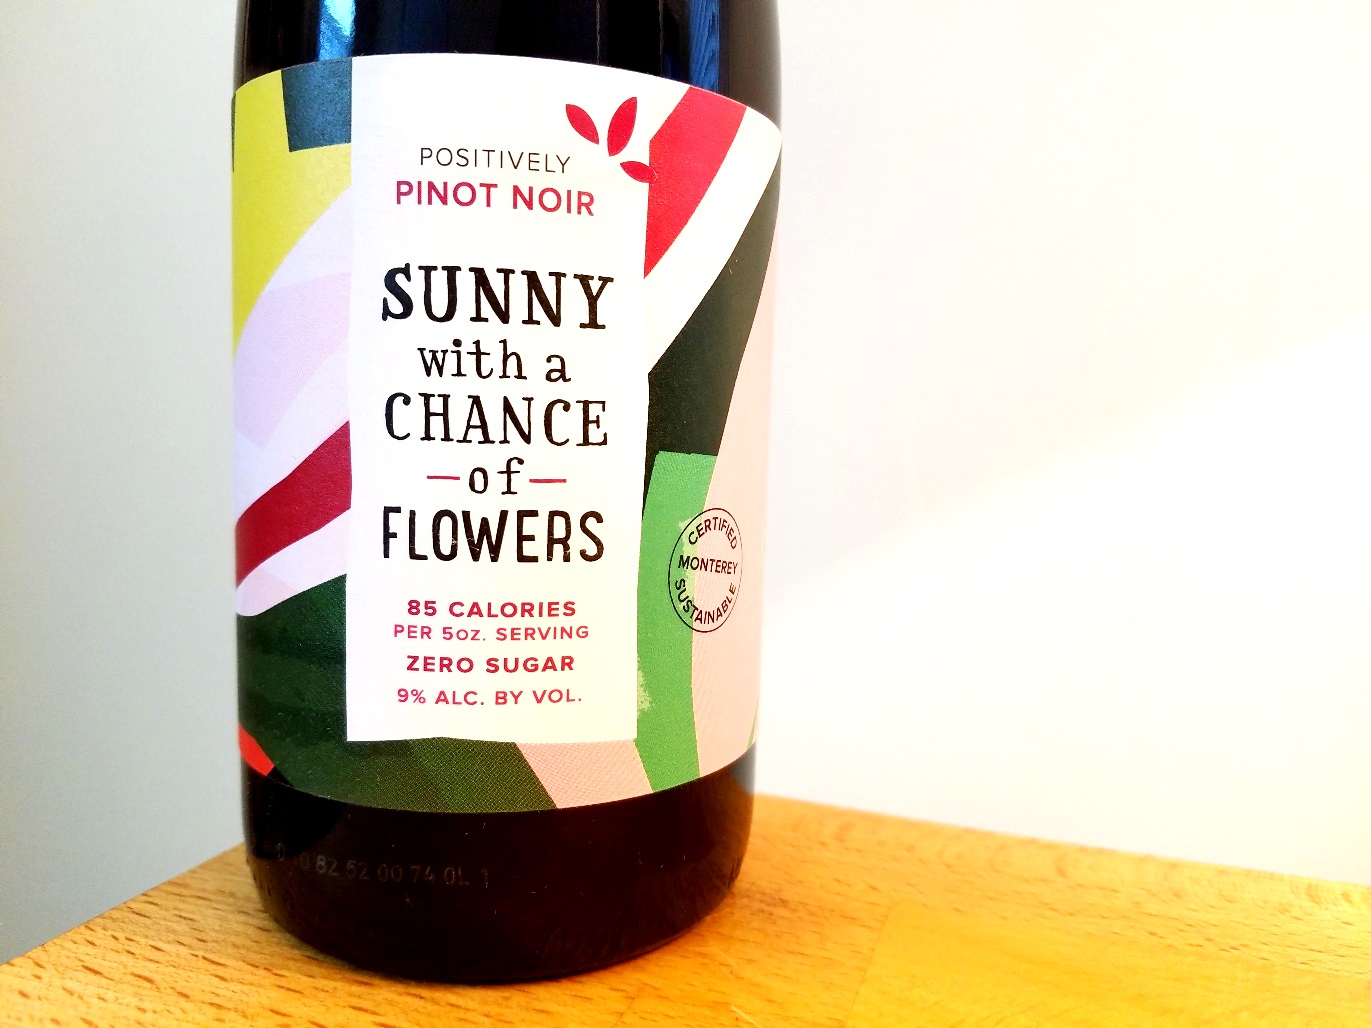 Sunny with a Chance of Flowers, Positively Pinot Noir 2019, Monterey, California, Wine Casual